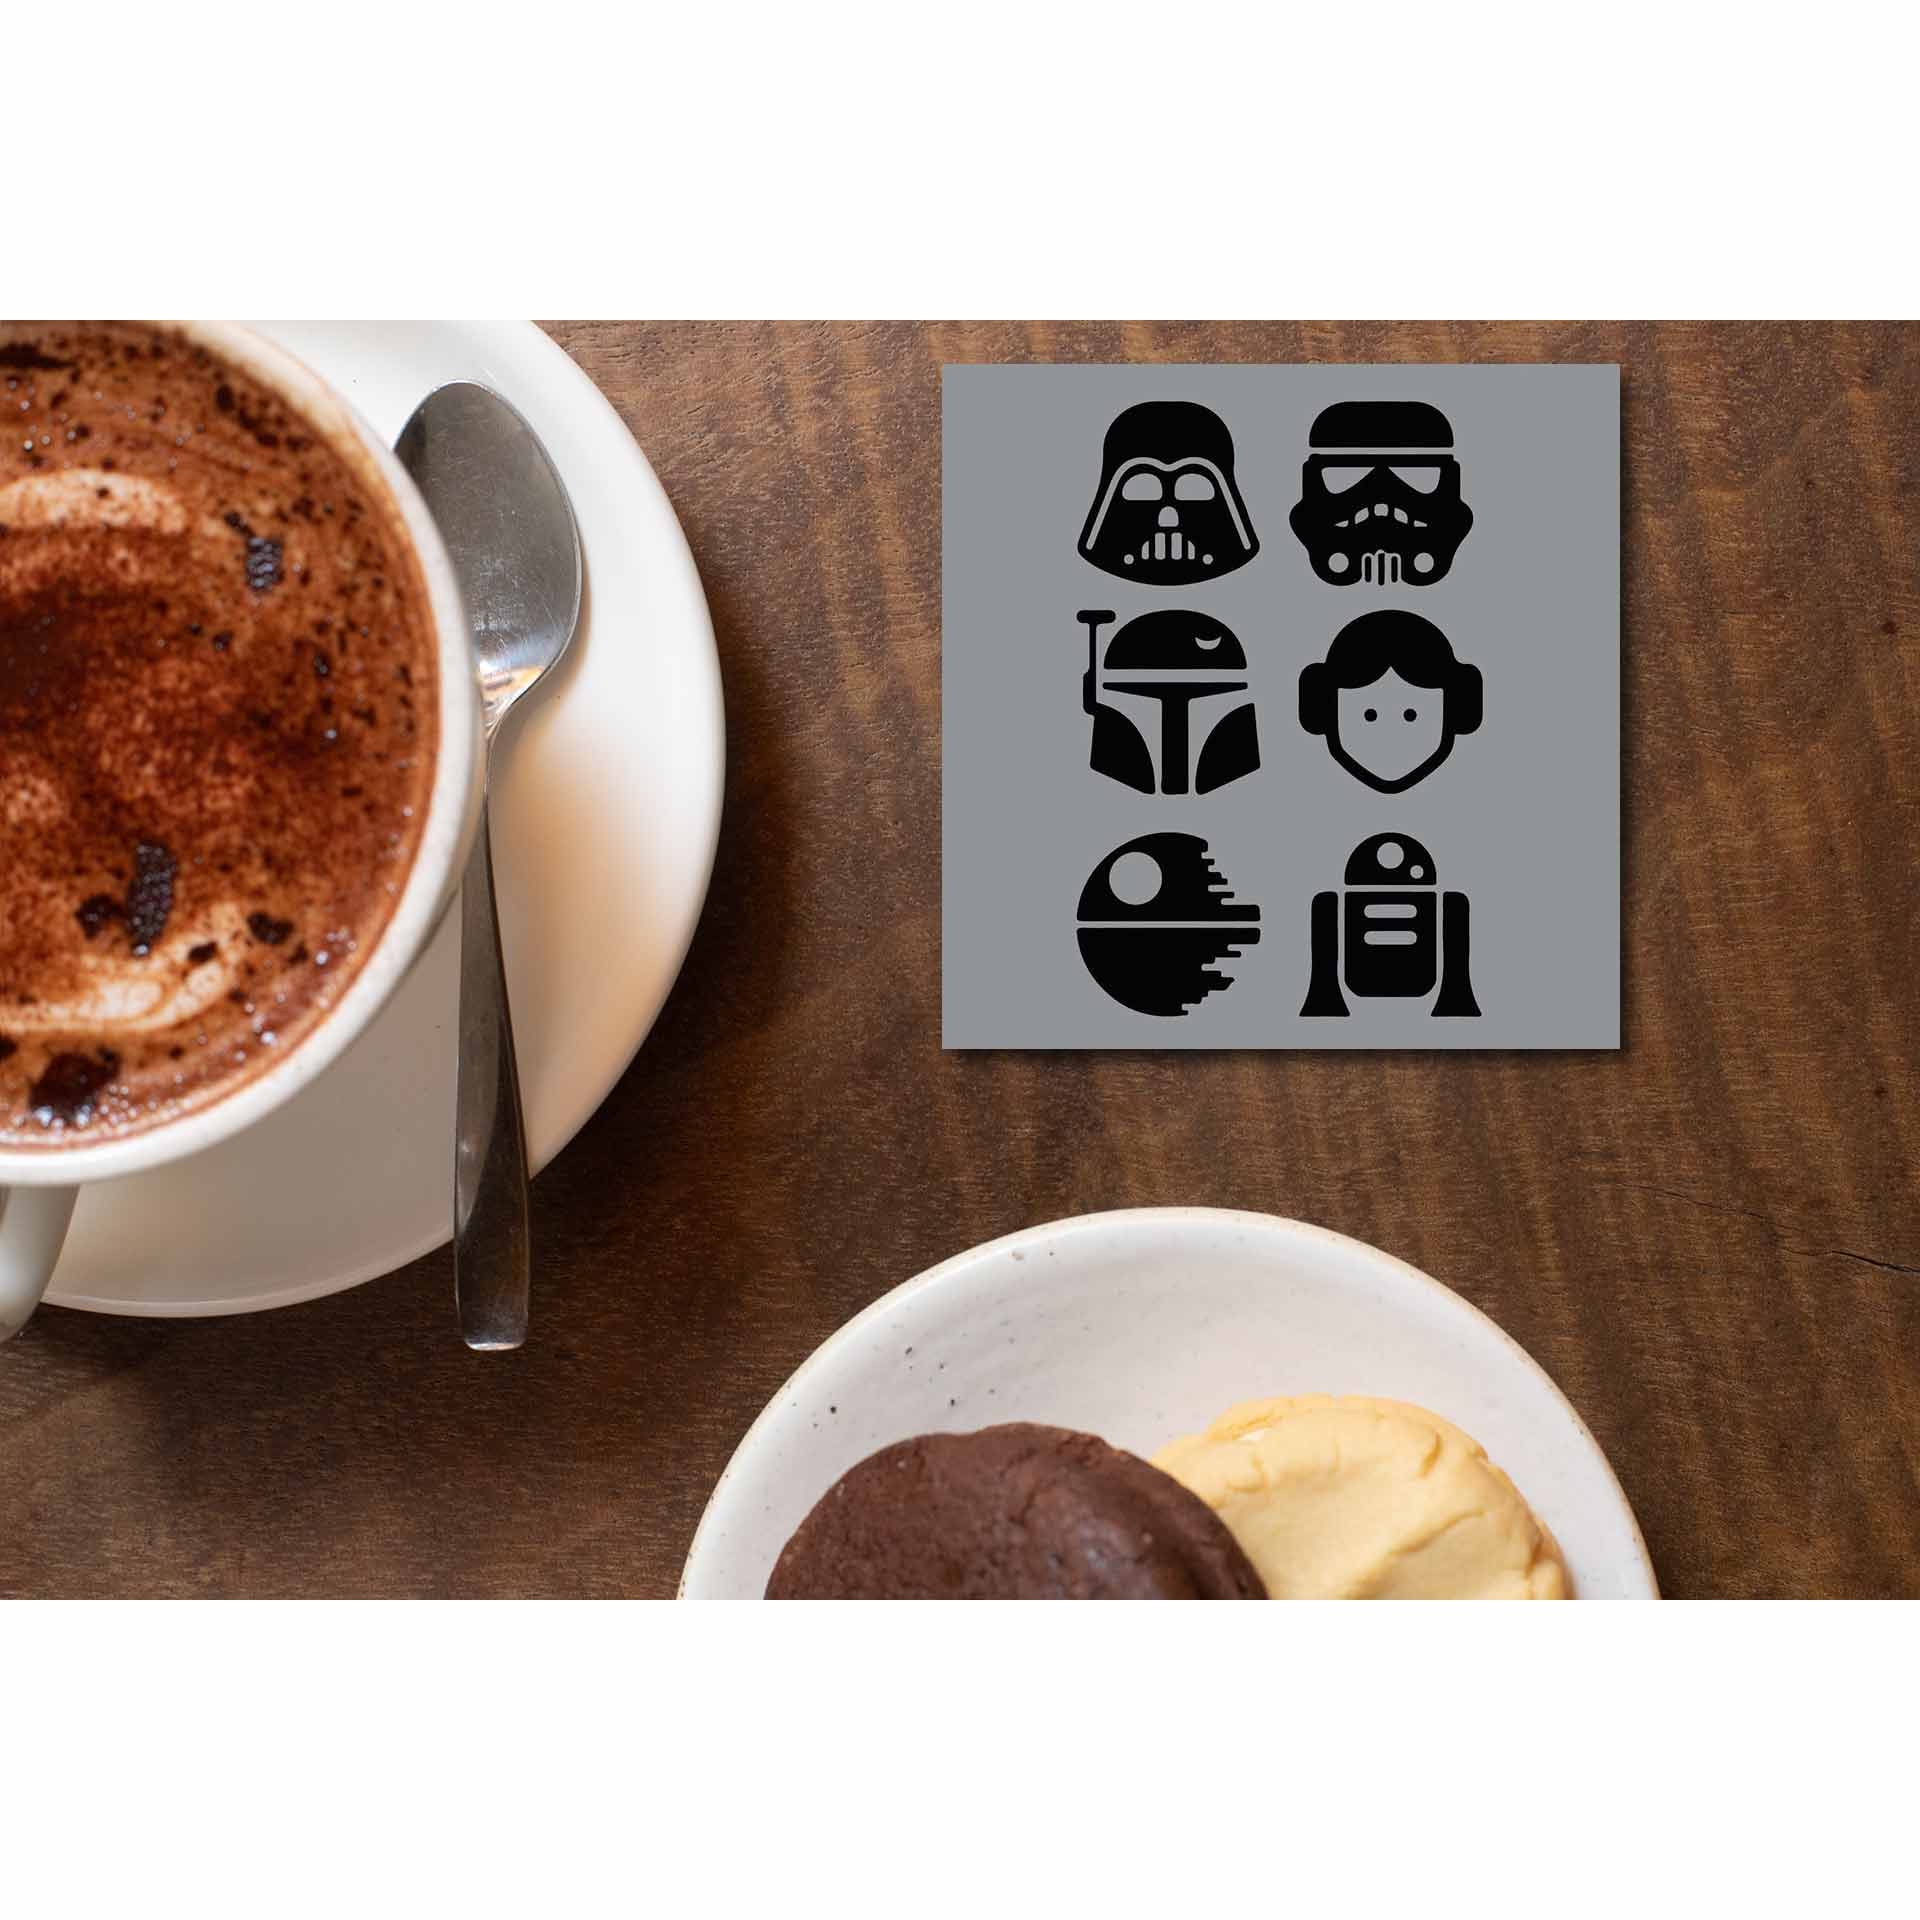 star wars star cast coasters wooden table cups indian tv & movies buy online india the banyan tee tbt men women girls boys unisex